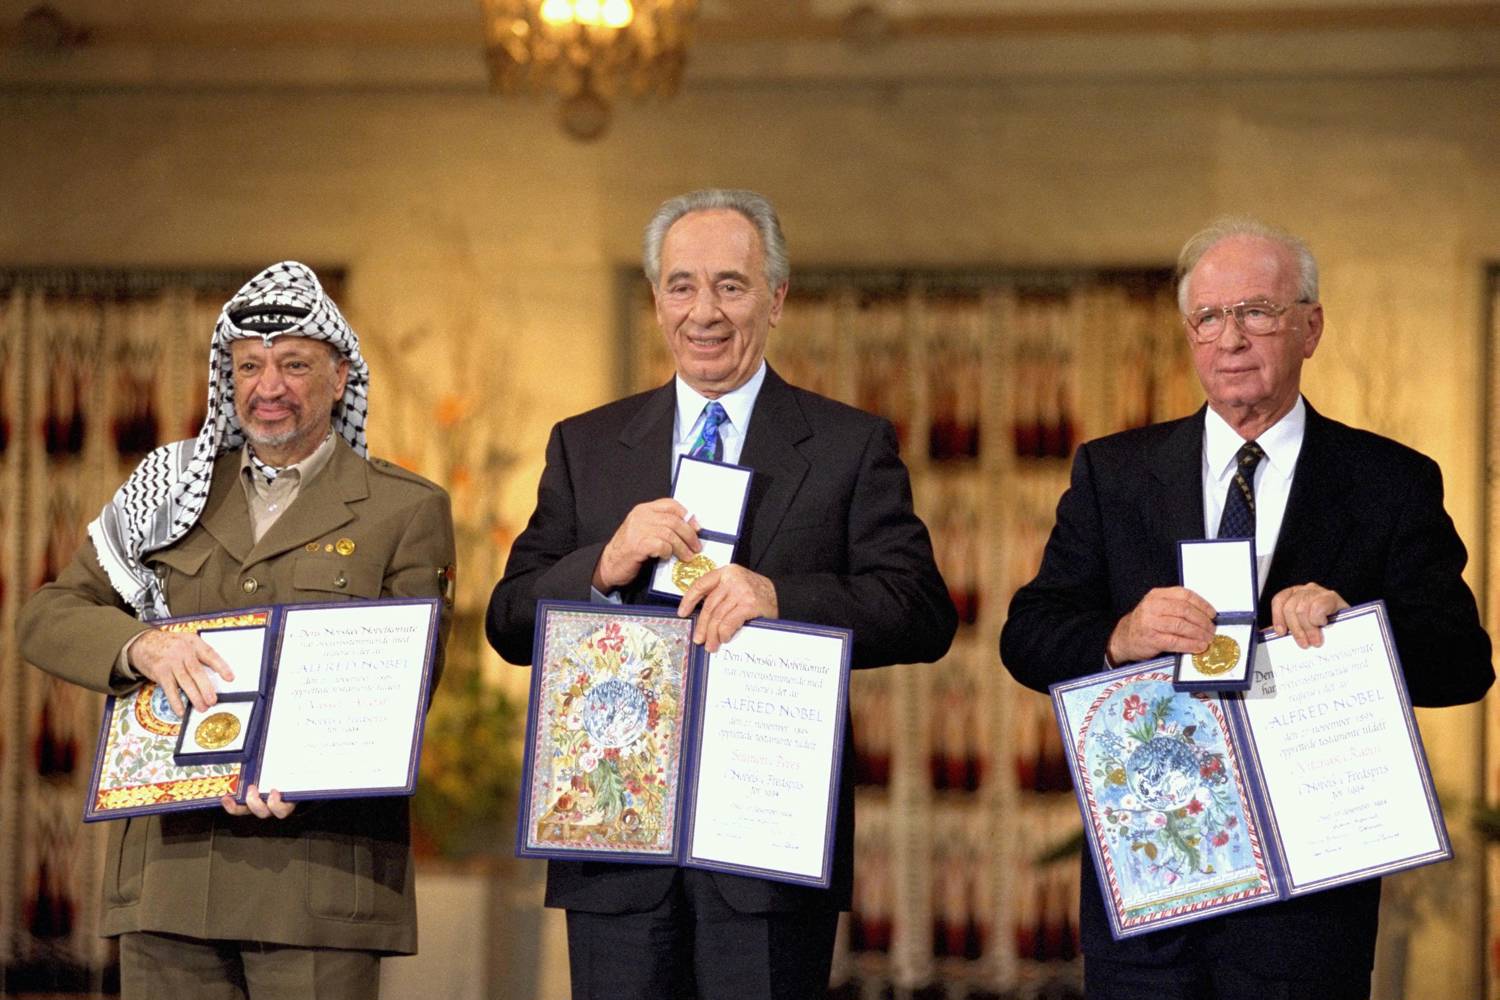 The Nobel Peace Prize laureates for 1994 in Oslo. From left to right: PLO Chairman Yasser Arafat, Israeli Foreign Minister Shimon Peres, Israeli Prime Minister Yitzhak Rabin. Photo: Saar Yaacov, Israeli Government Press Office